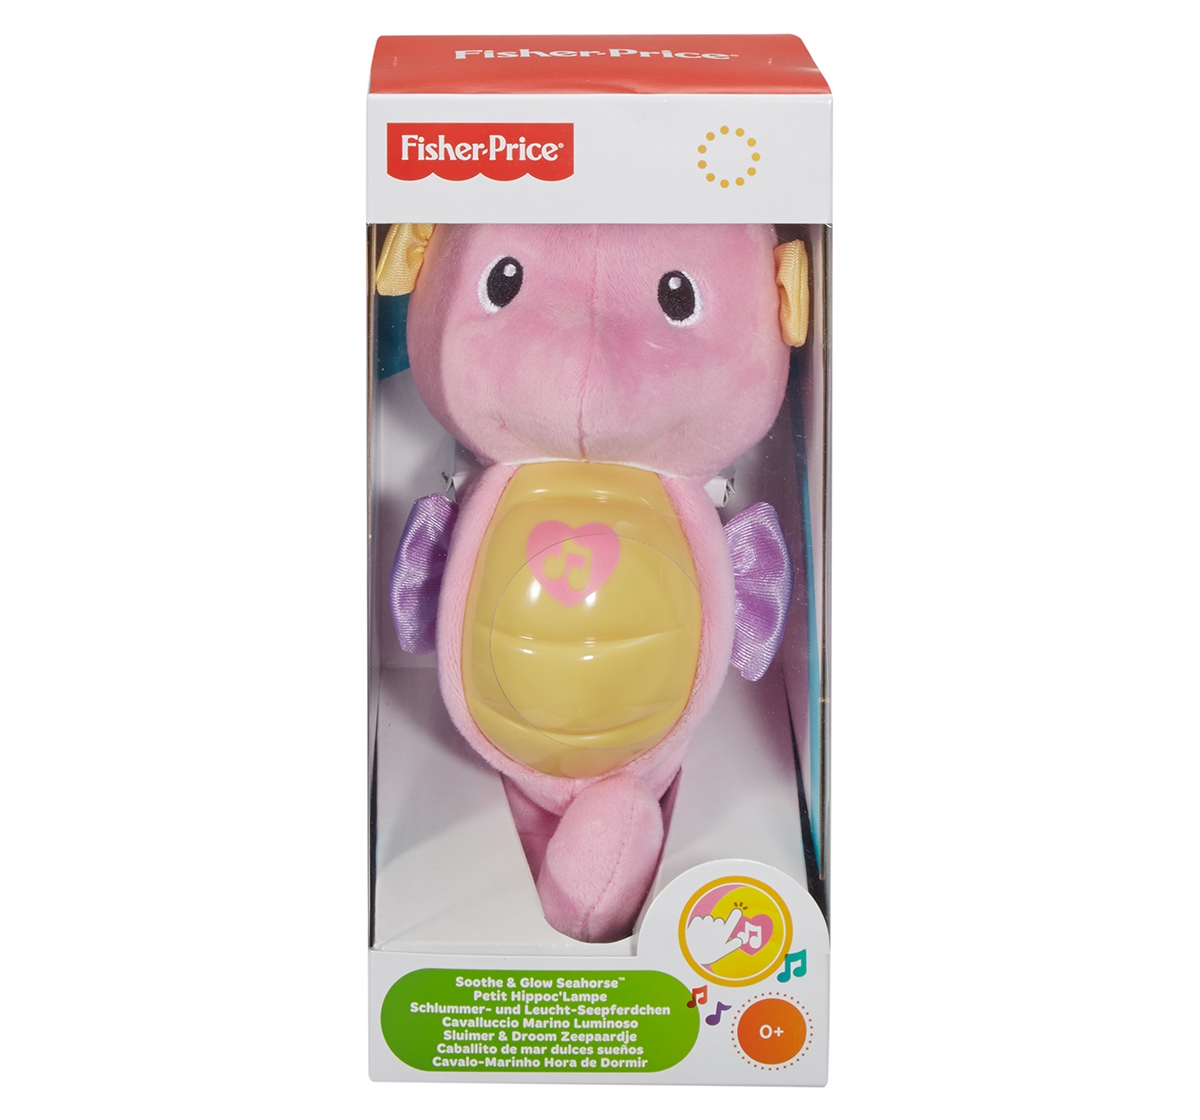 Fisher-Price | Fisher price Sooth and glow Sea Horse, New Born for Kids age 0M+ ( pink) 4